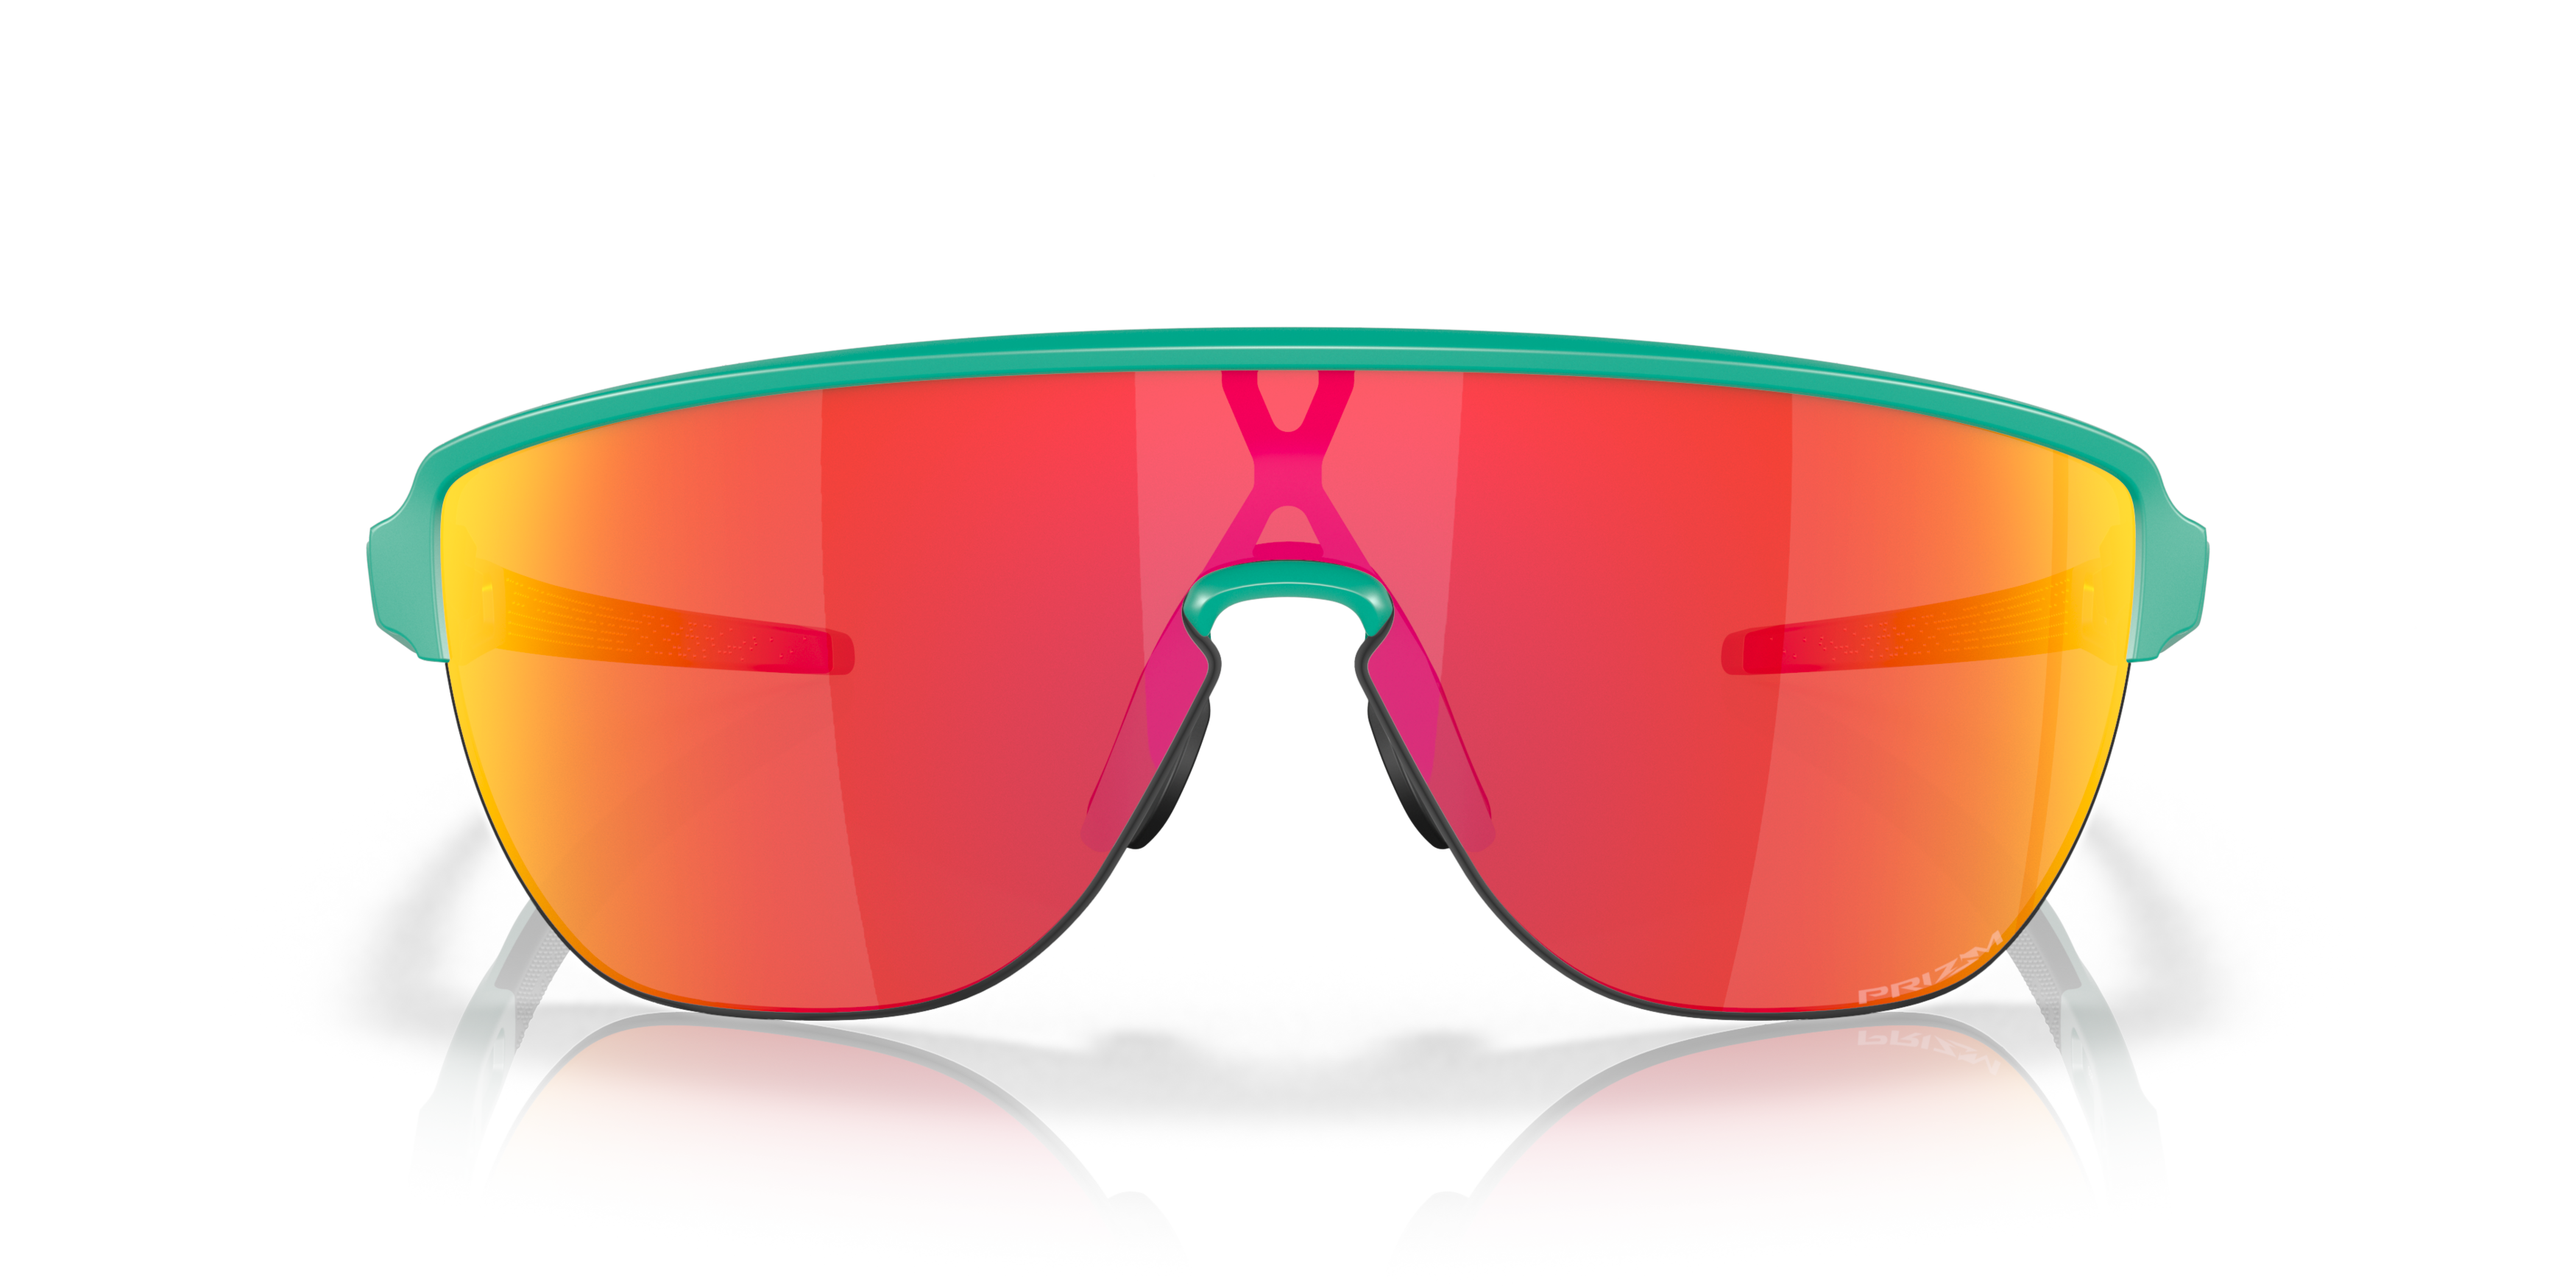 [products.image.front] Oakley 0OO9248 924804